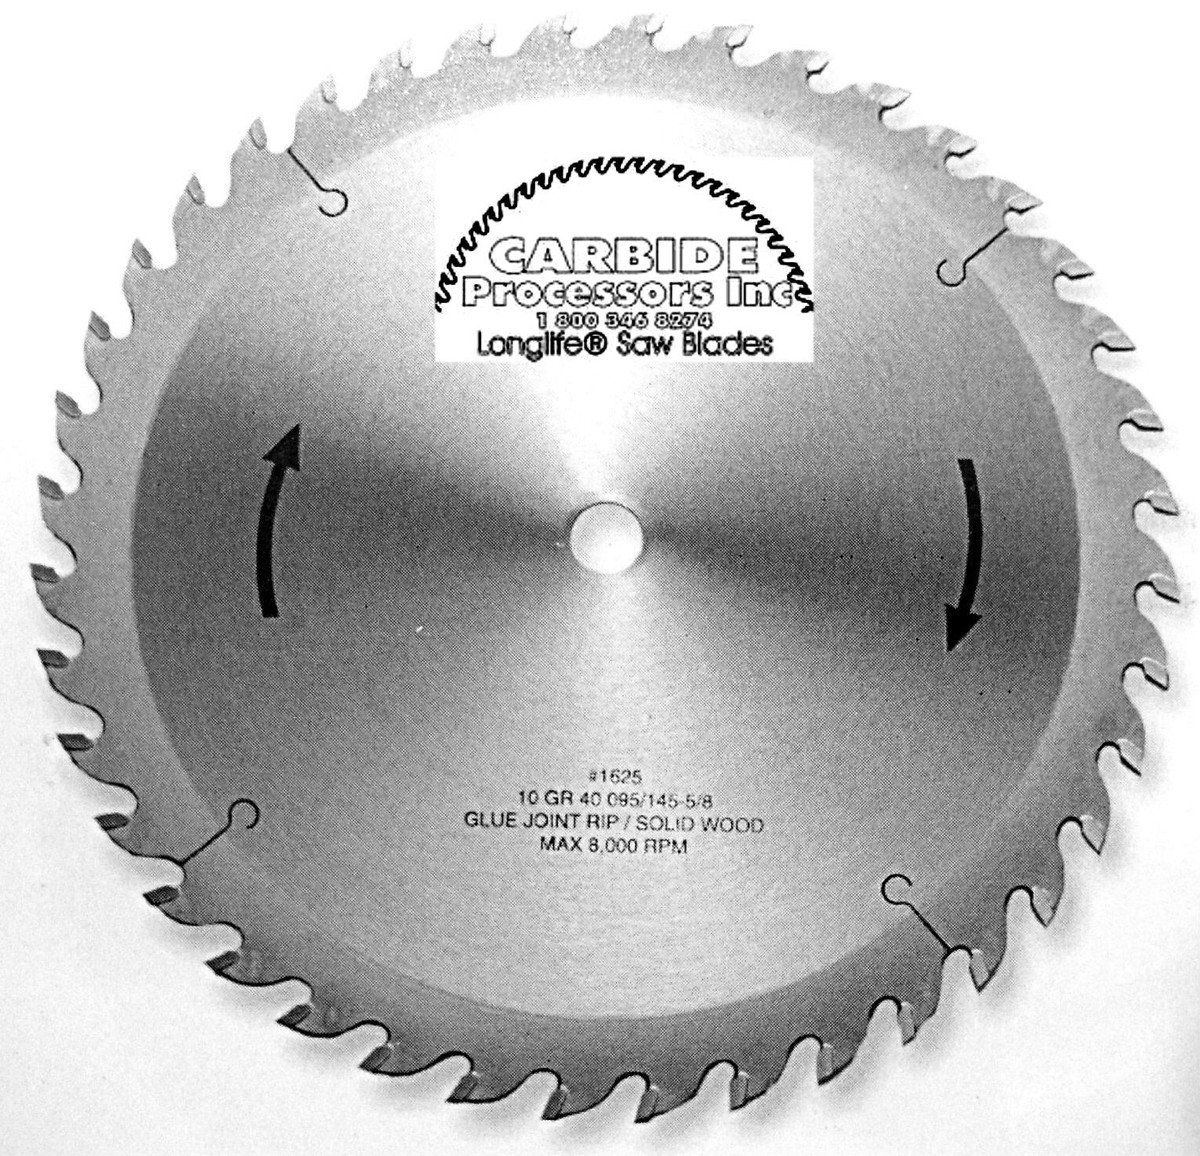 Glue Joint Rip Saw Blade, 12" Dia, 36T, .161 Kerf, 1" Arbor, World's Best  37210